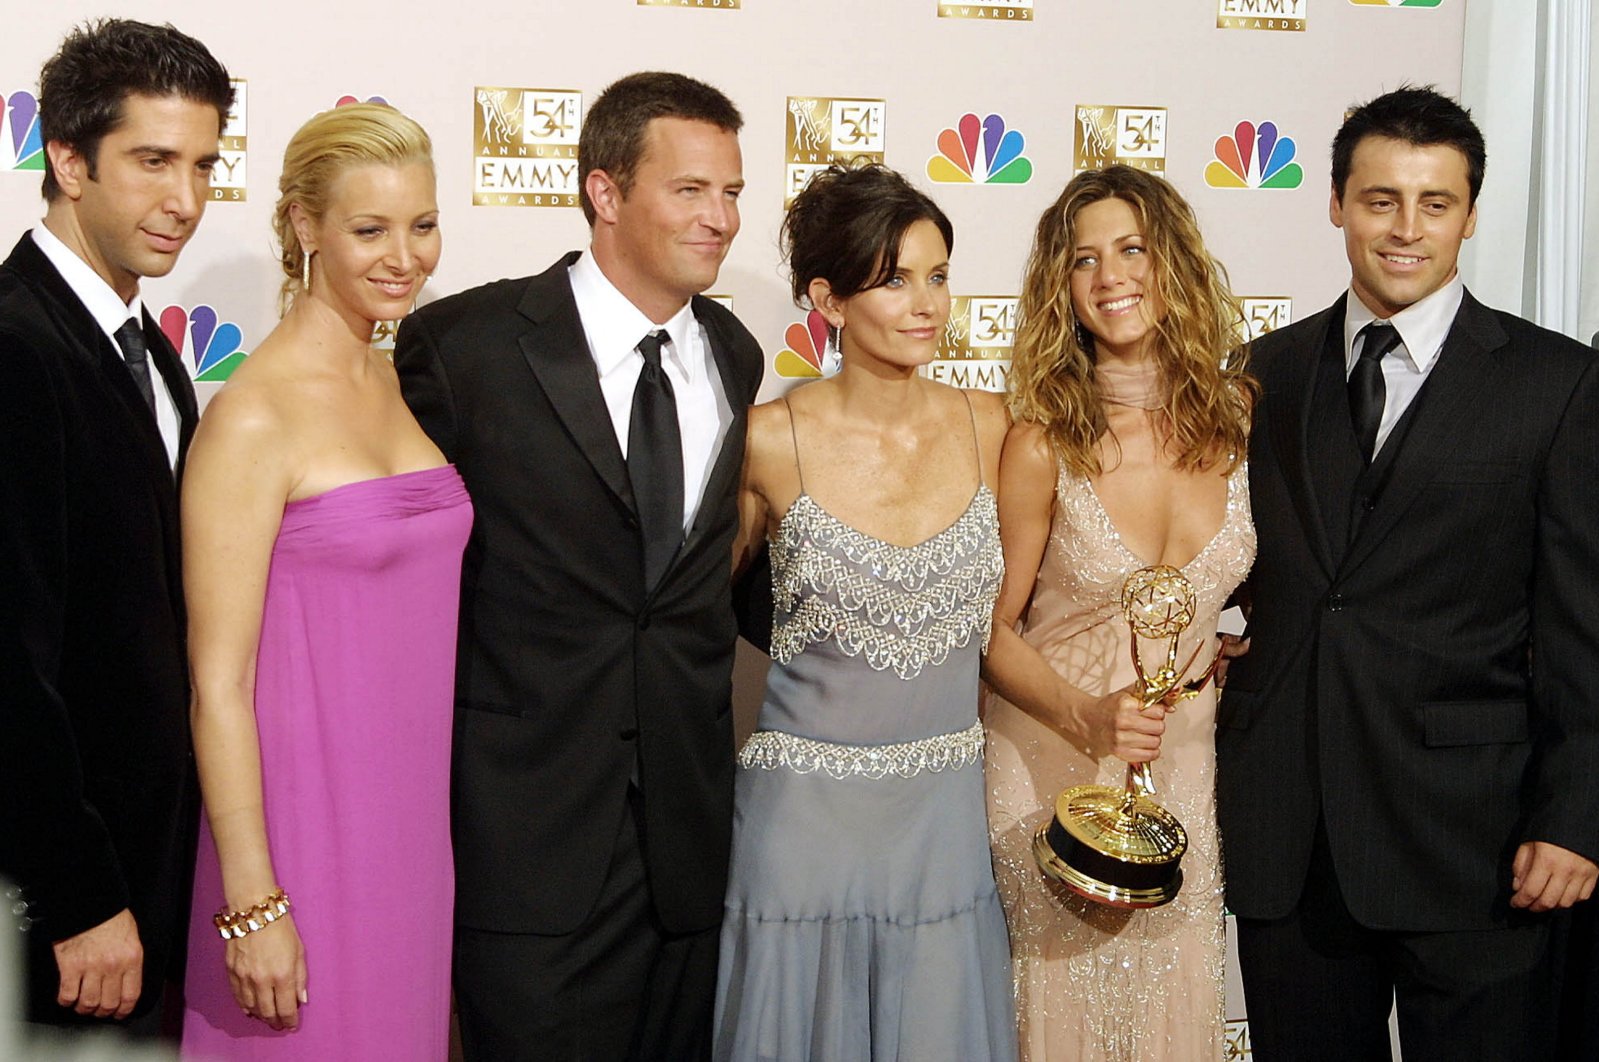 Cast members from &quot;Friends&quot; (L-R) David Schwimmer, Lisa Kudrow, Mathew Perry, Courtney Cox Arquette, Jennifer Aniston and Matt LeBlanc, pose for photographers at the 54th Annual Emmy Awards at the Shrine Auditorium in Los Angeles, California, U.S., Sept. 22, 2002. (AFP Photo)